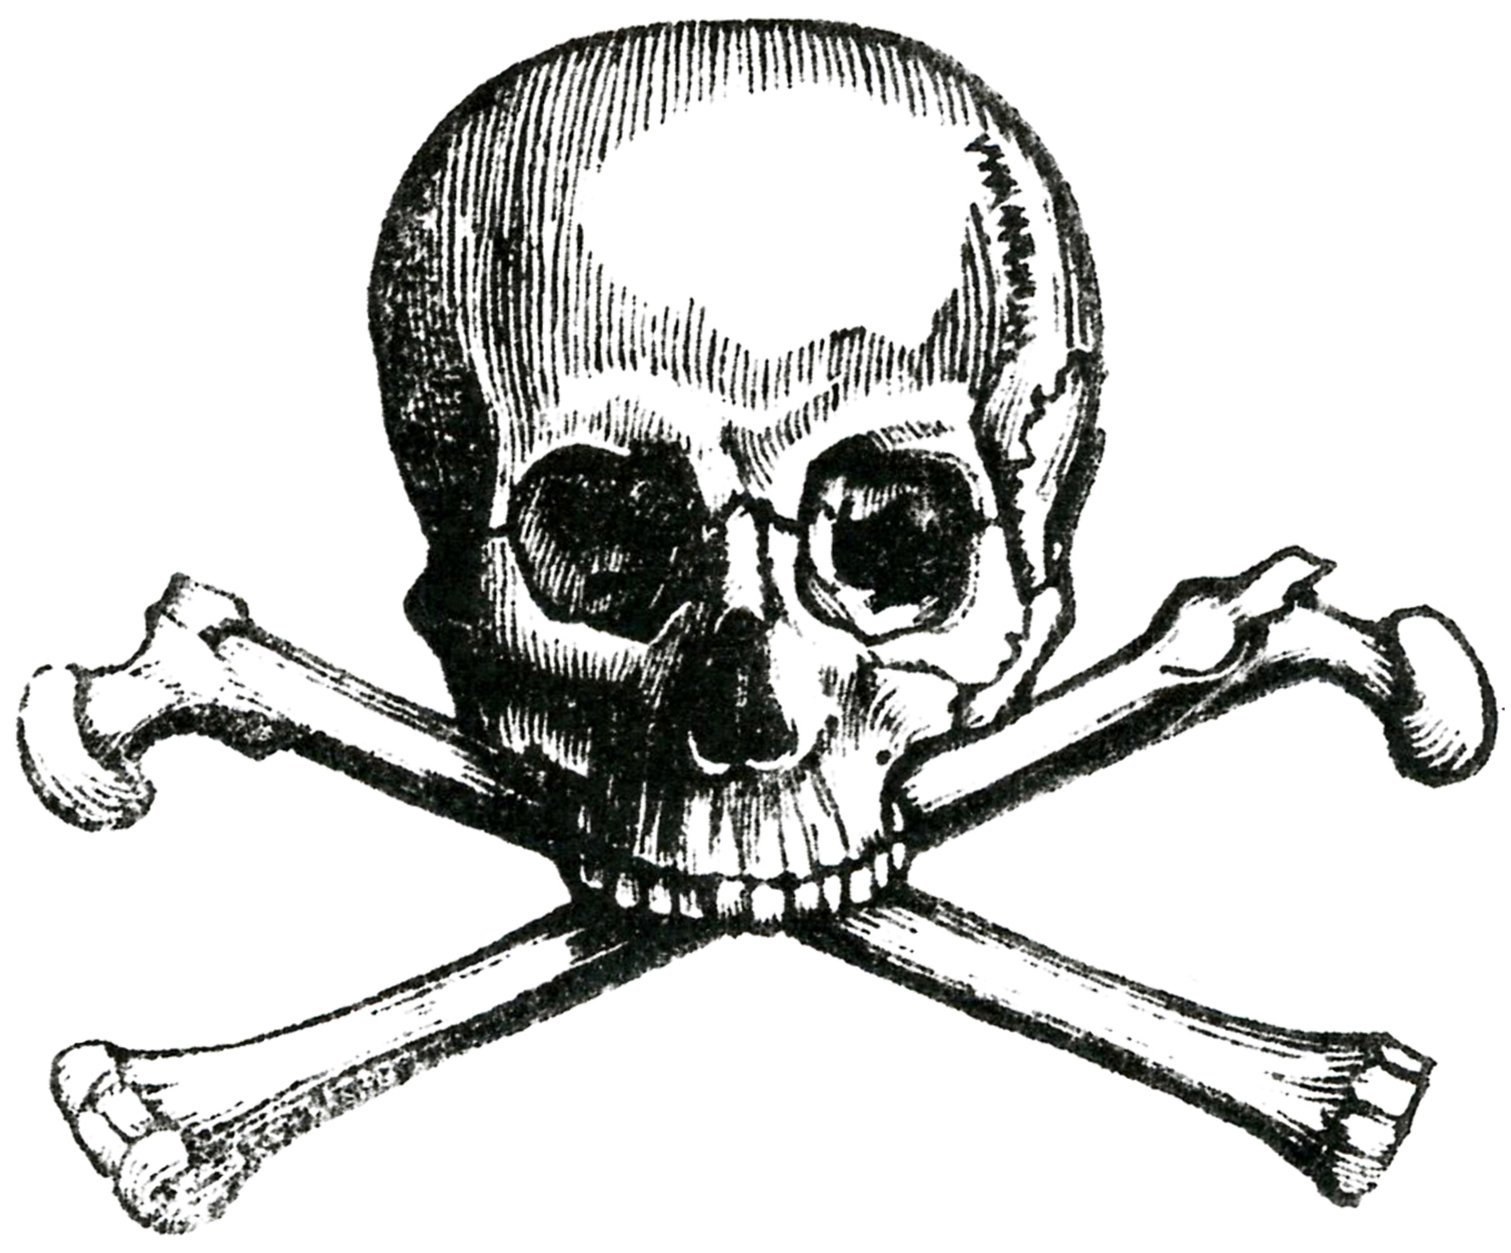 Early-Skull-Image-GraphicsFairy